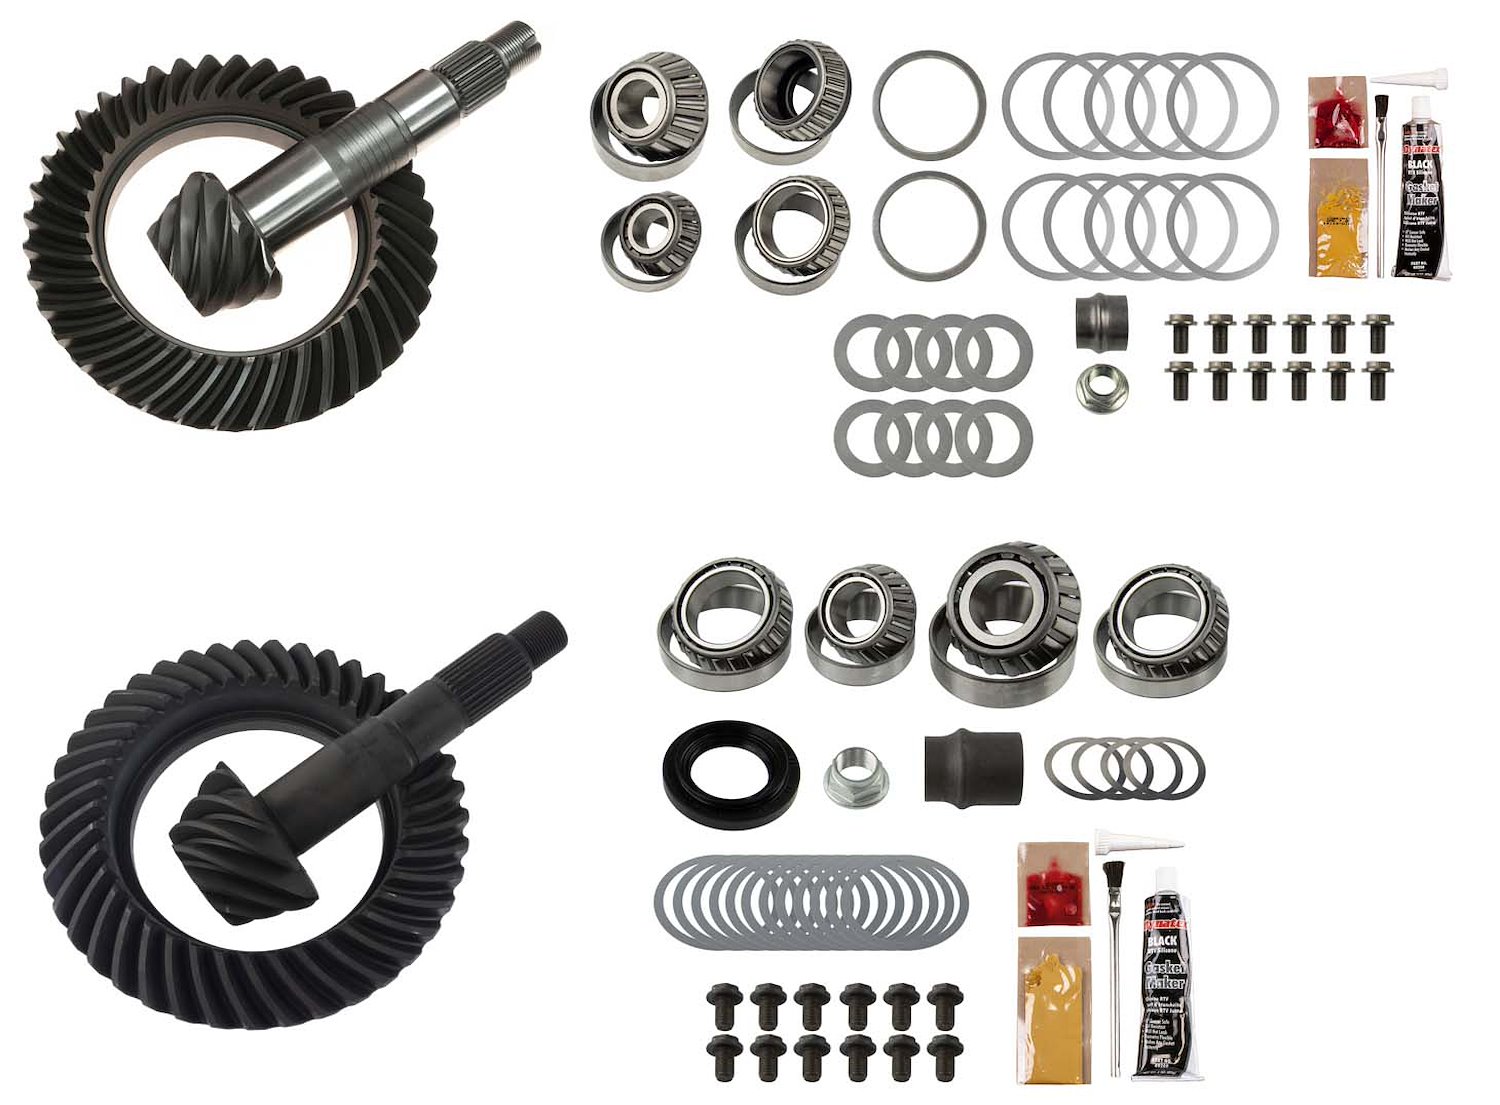 Complete Front and Rear Ring and Pinion Kit 2005-2015 Toyota Tacoma - 4.56 Ratio